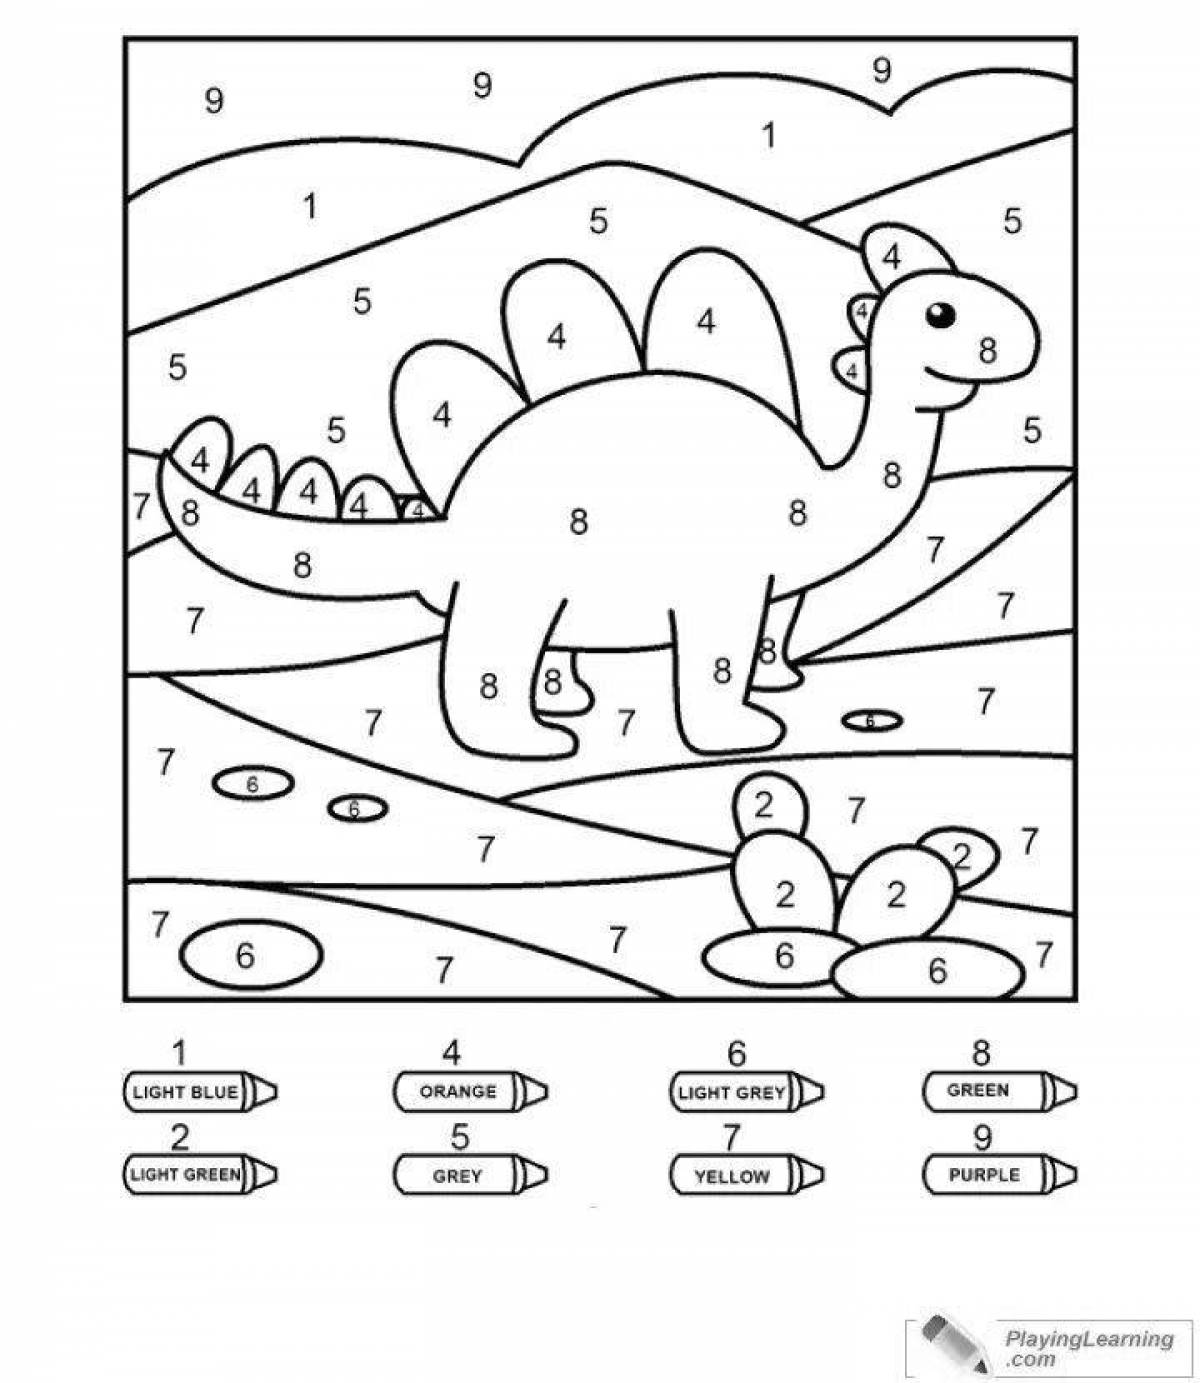 Fun coloring by numbers coloring book